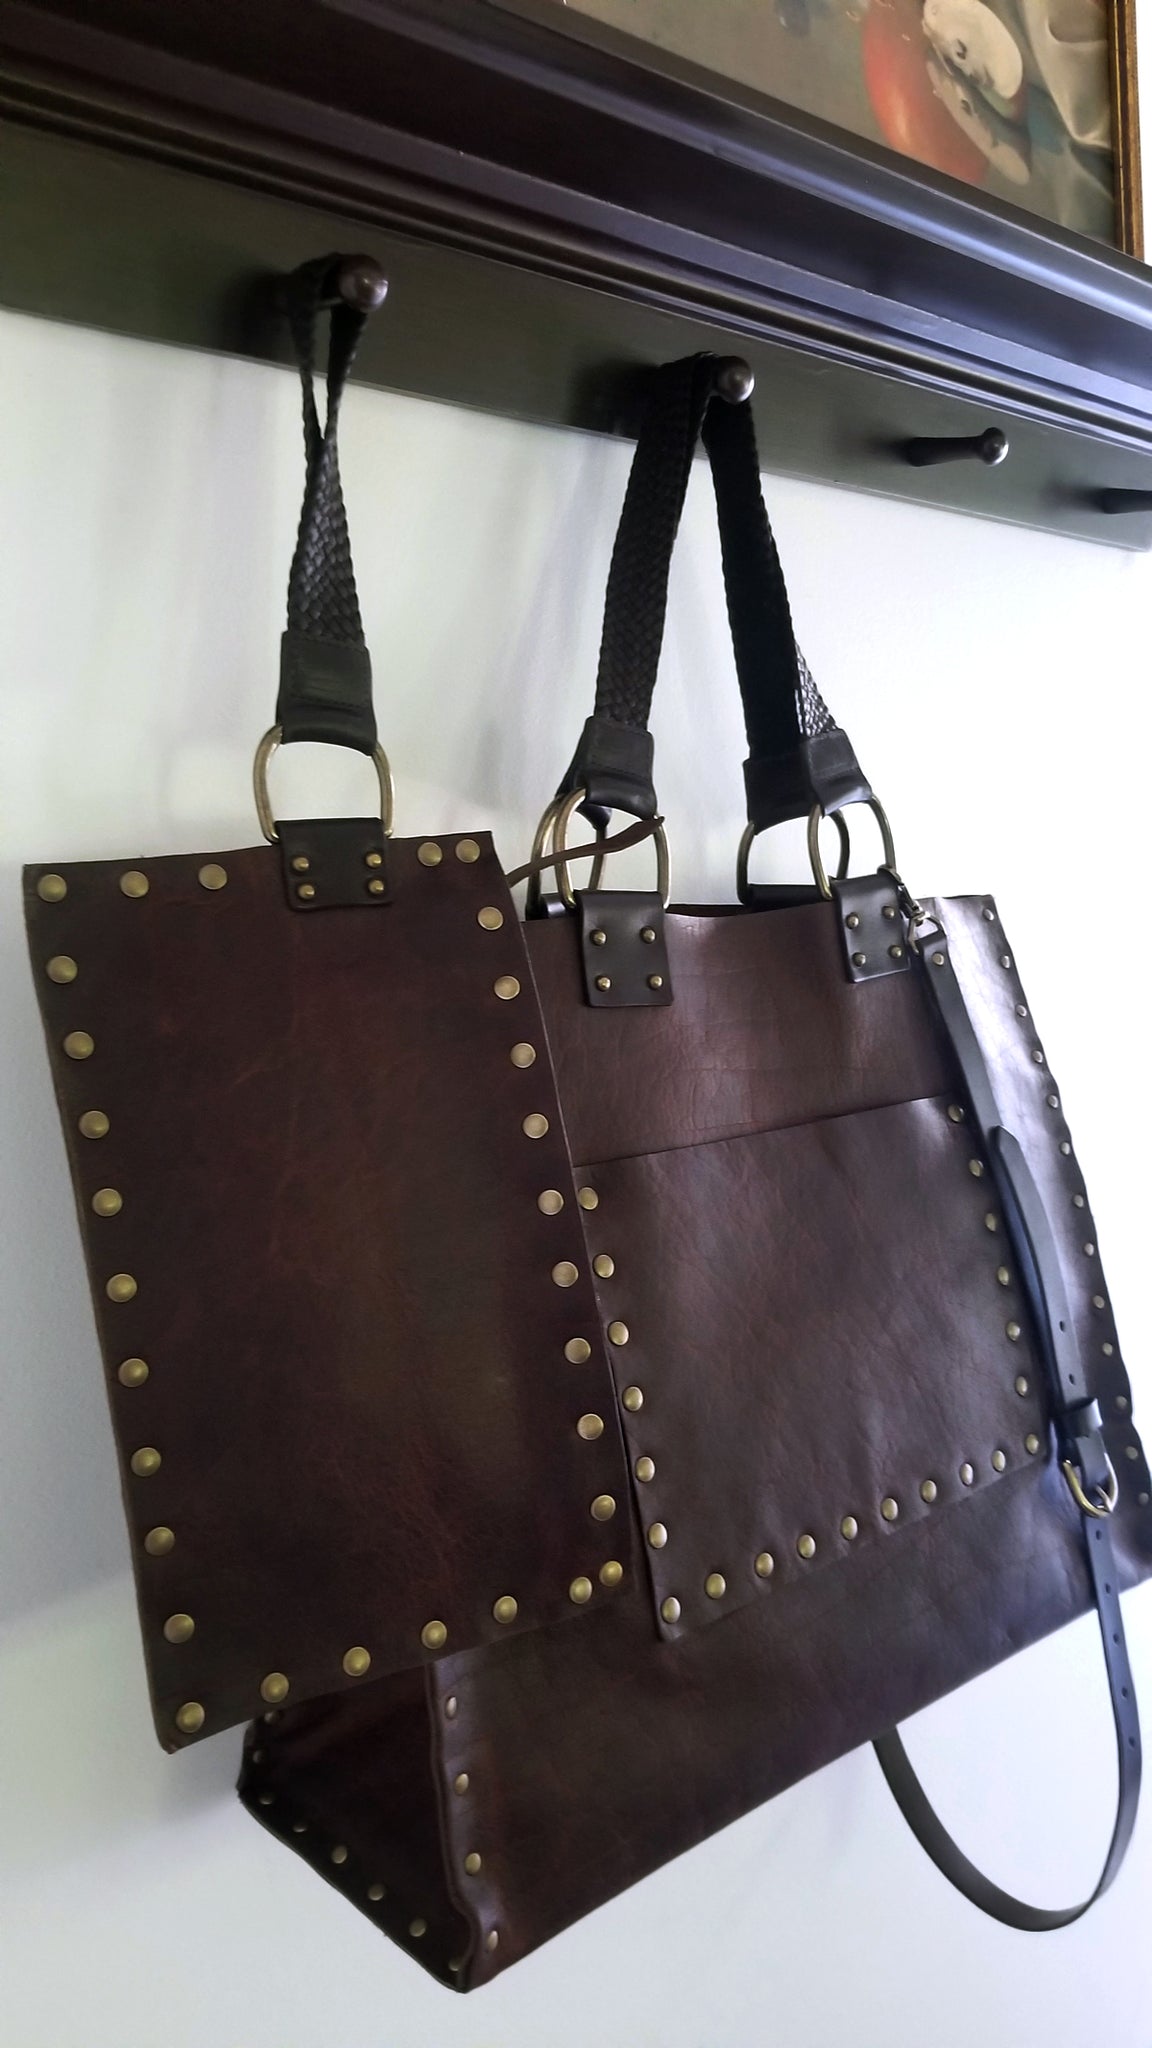 leather tote bag with shoulder strap and leather wristlet, part of the Malia Collection of tote bags, purses and carry all bags, featured in canela navajo bison leather 